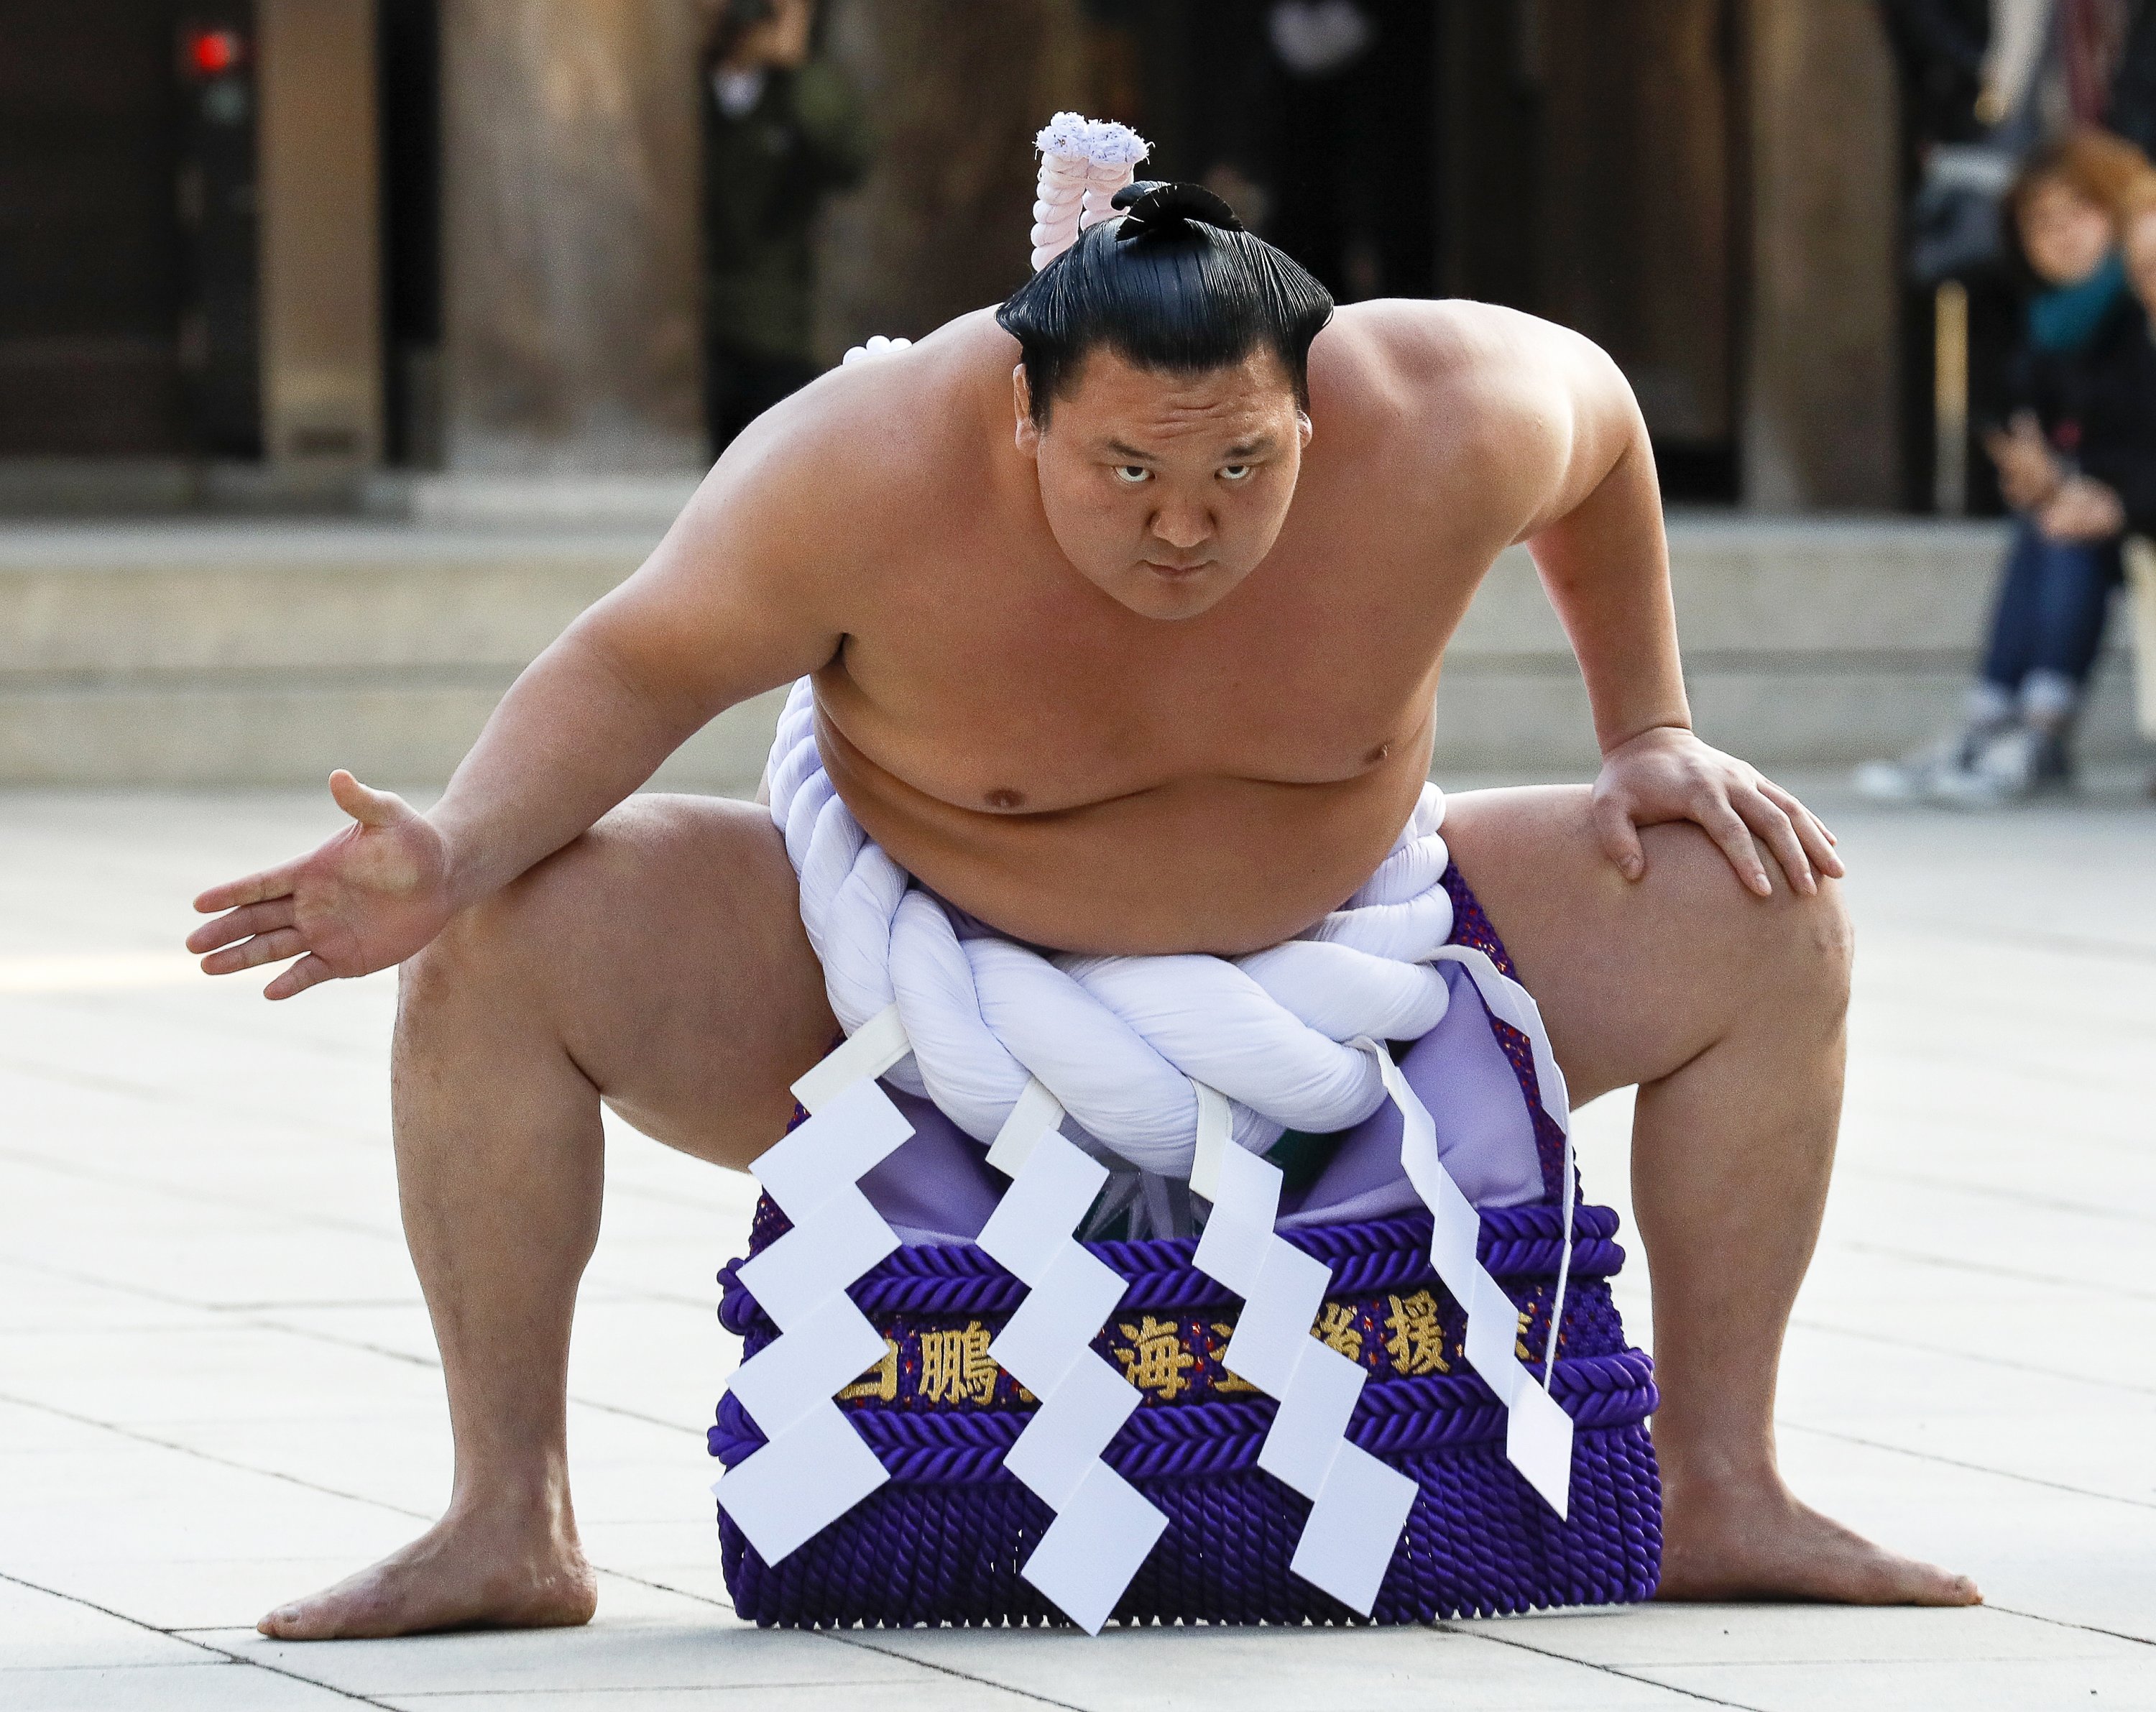 Knee issues force greatest-ever sumo champion Hakuho to retire | Daily Sabah